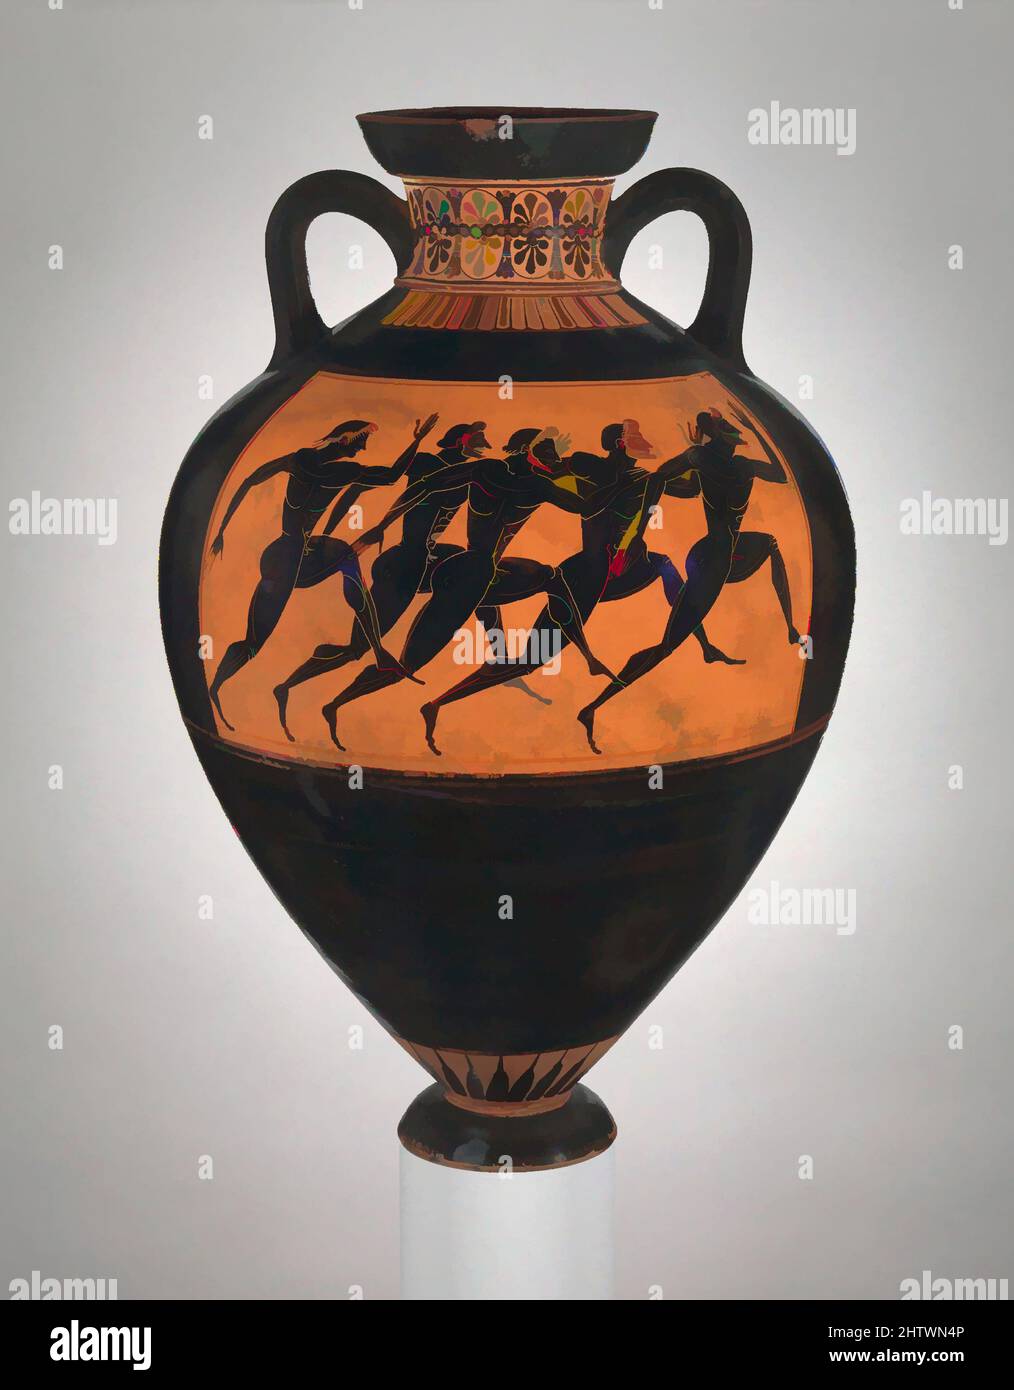 Art inspired by Terracotta Panathenaic prize amphora, Archaic, ca. 530 B.C., Greek, Attic, Terracotta; black-figure, H. 24 1/2 in. (62.2 cm), Vases, Obverse, Athena, Reverse, footrace. The Euphiletos Painter was trained in the black-figure technique. It is interesting to compare the, Classic works modernized by Artotop with a splash of modernity. Shapes, color and value, eye-catching visual impact on art. Emotions through freedom of artworks in a contemporary way. A timeless message pursuing a wildly creative new direction. Artists turning to the digital medium and creating the Artotop NFT Stock Photo